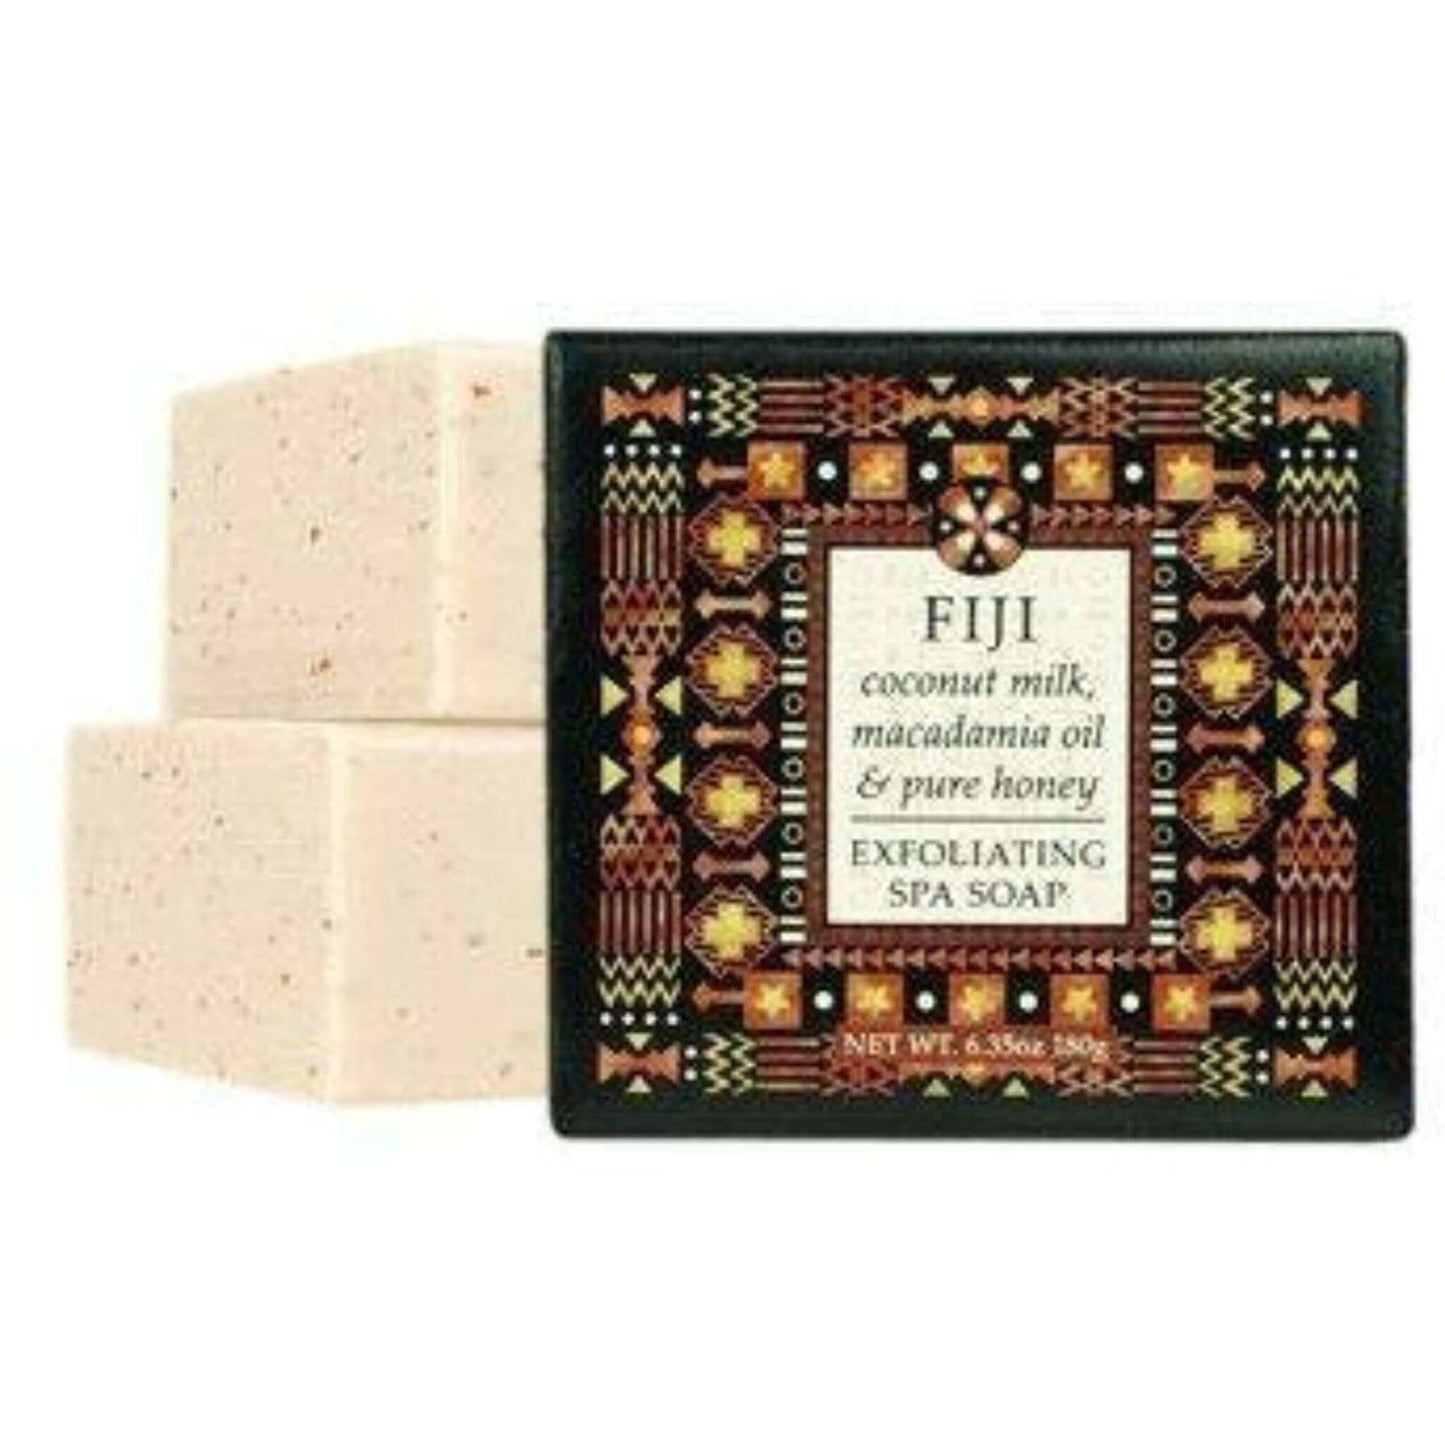 Soothing Fiji coconut milk, macadamia oil, and pure honey exfoliating spa soap.